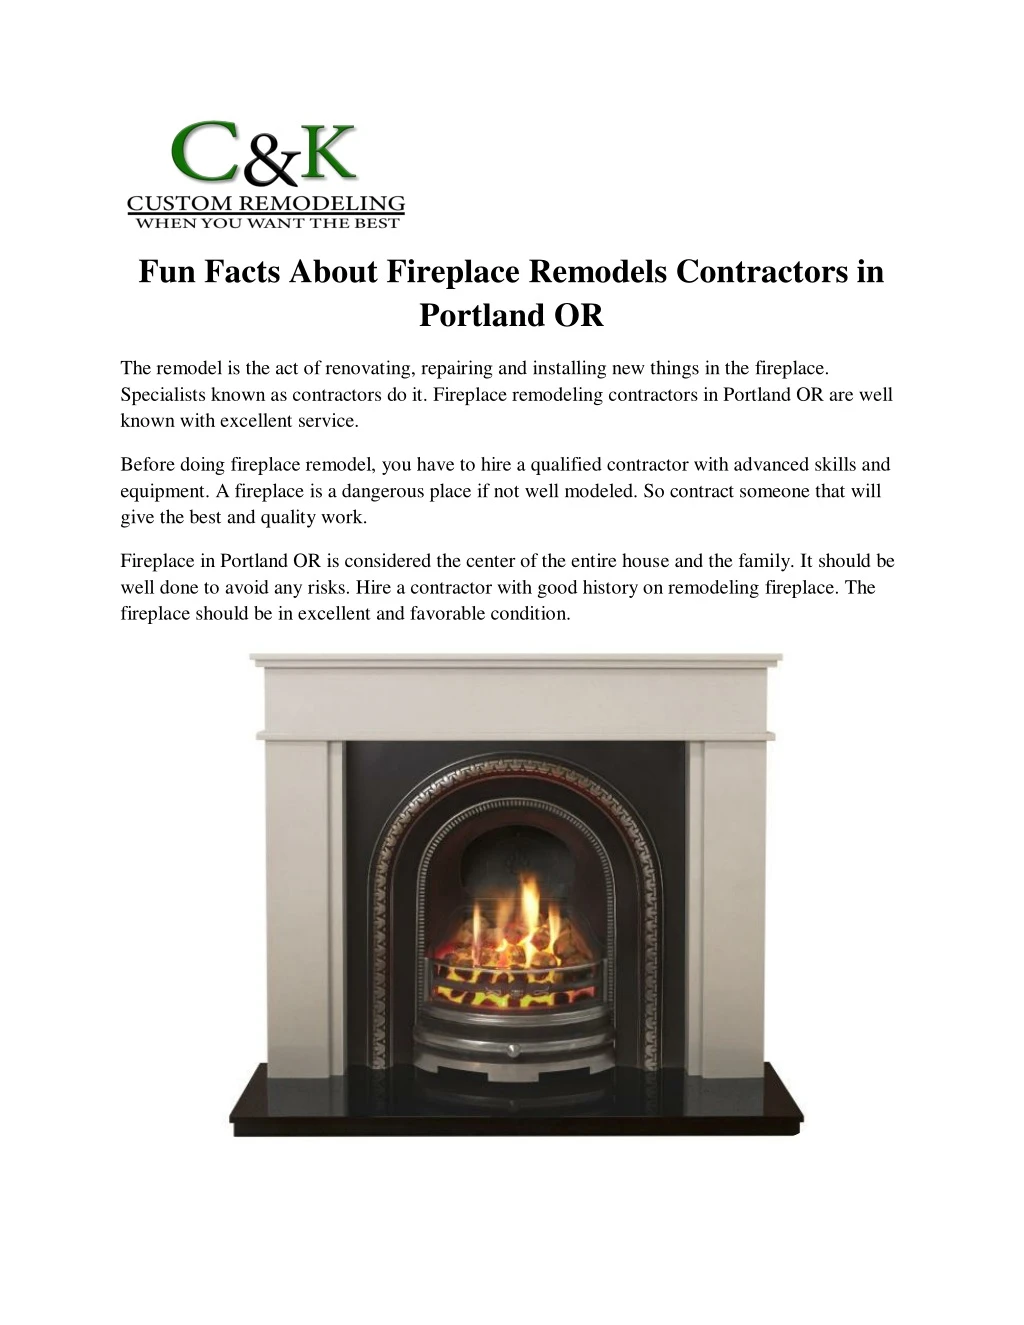 fun facts about fireplace remodels contractors